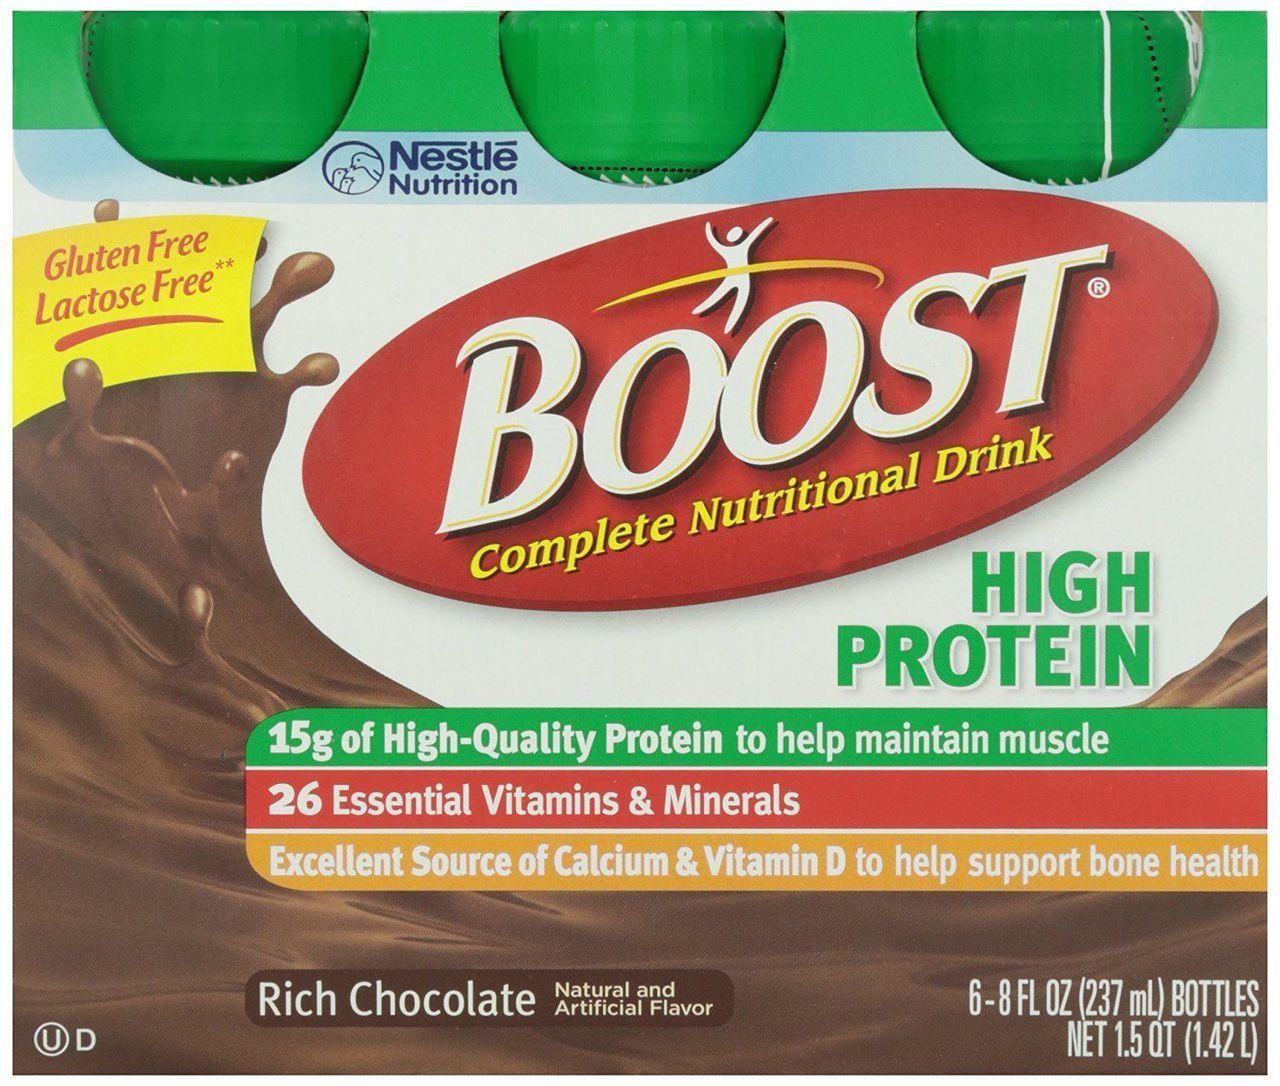 Boost Nutritional Drink Logo - Boost High Protein Chocolate Drink, 6 ct, 8 oz (4 packs)